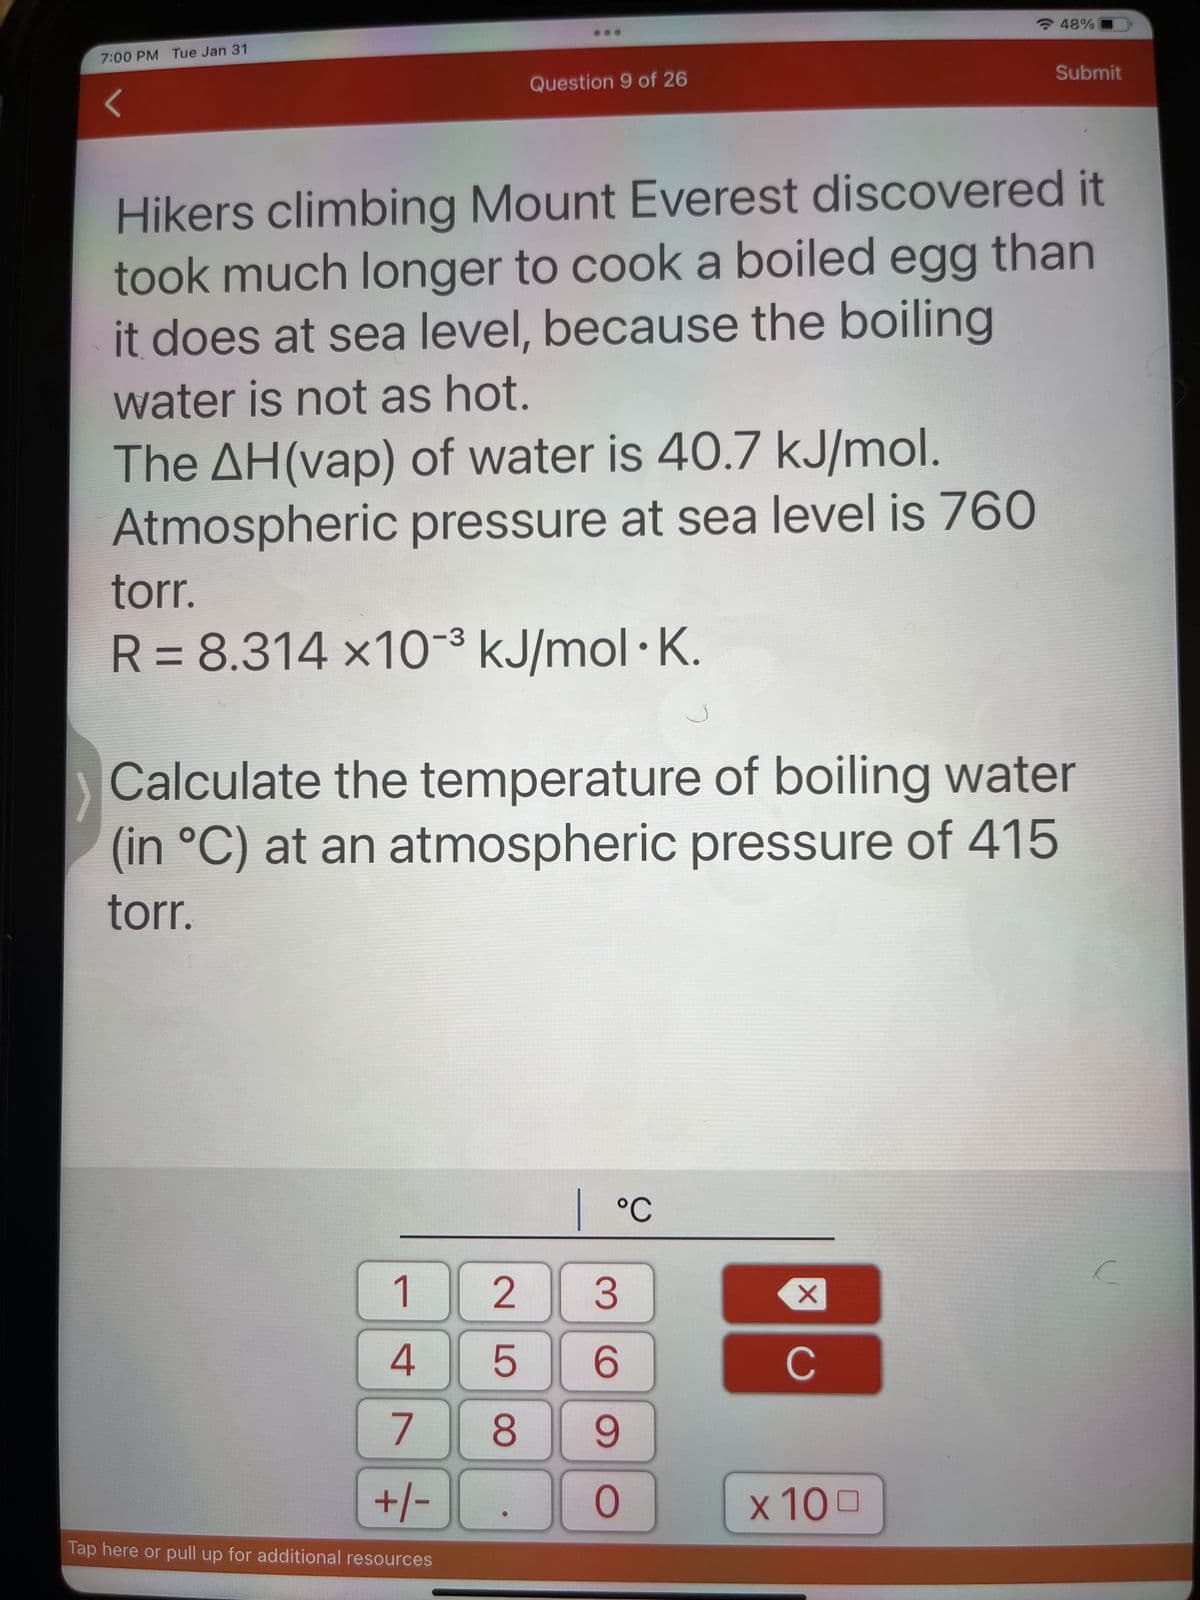 7:00 PM Tue Jan 31
Question 9 of 26
The AH(vap) of water is 40.7 kJ/mol.
Atmospheric pressure at sea level is 760
Hikers climbing Mount Everest discovered it
took much longer to cook a boiled egg than
it does at sea level, because the boiling
water is not as hot.
torr.
R = 8.314 x10³ kJ/mol. K.
1
4
7
+/-
Tap here or pull up for additional resources
Calculate the temperature of boiling water
(in °C) at an atmospheric pressure of 415
torr.
LO
| °C
2 3
5 6
8 9
O
X
48%
C
Submit
x 100